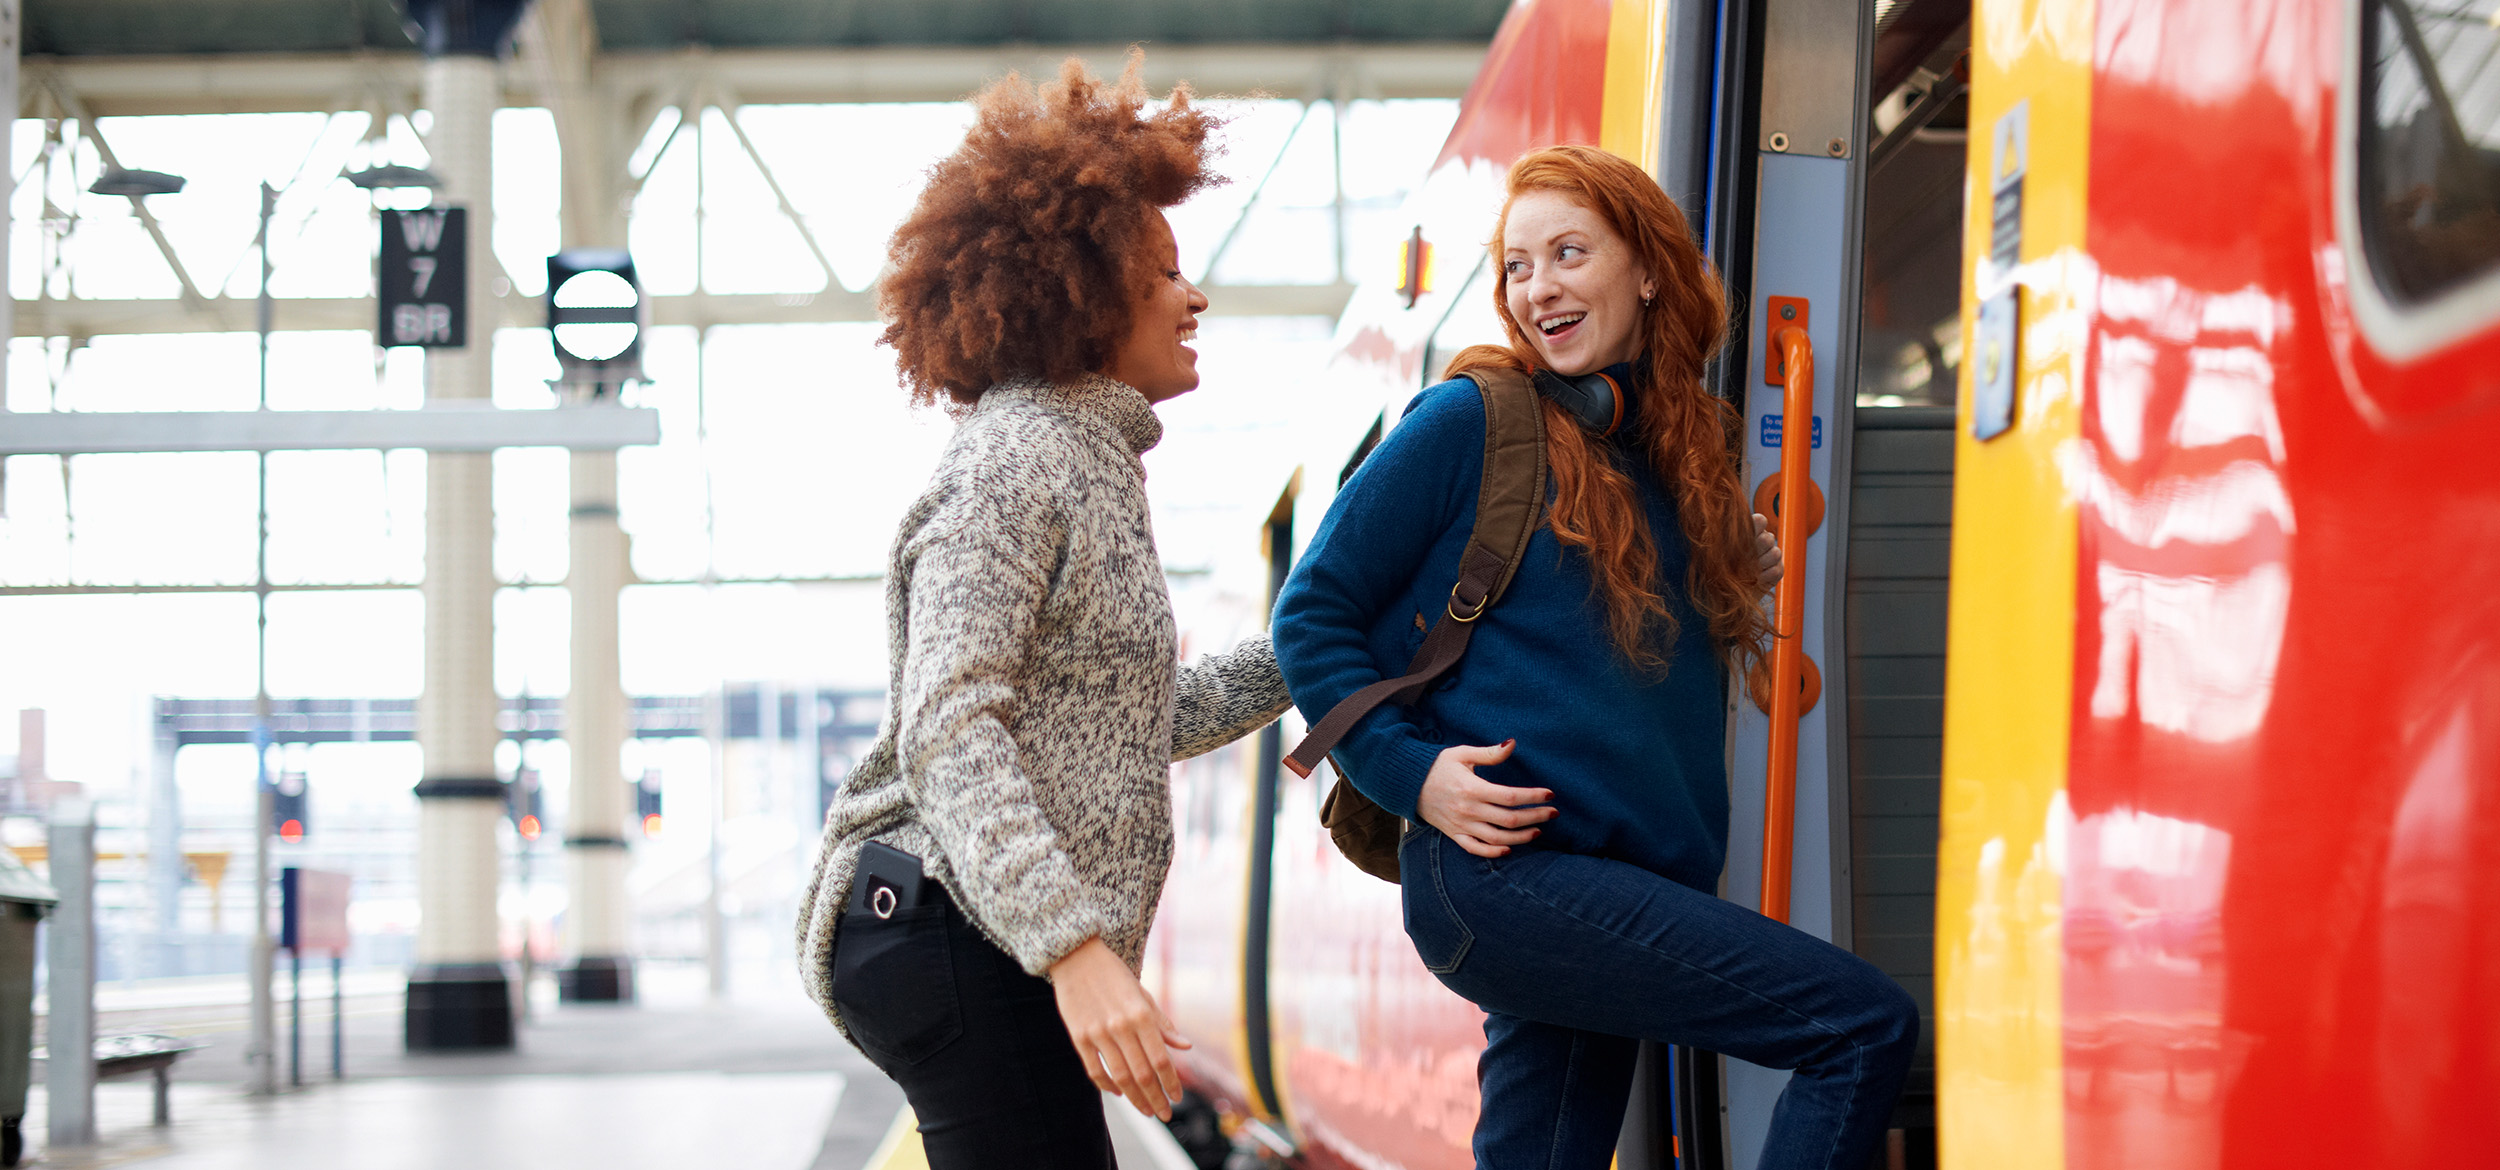 Two people boarding a train in England, smiling and laughing with each other.